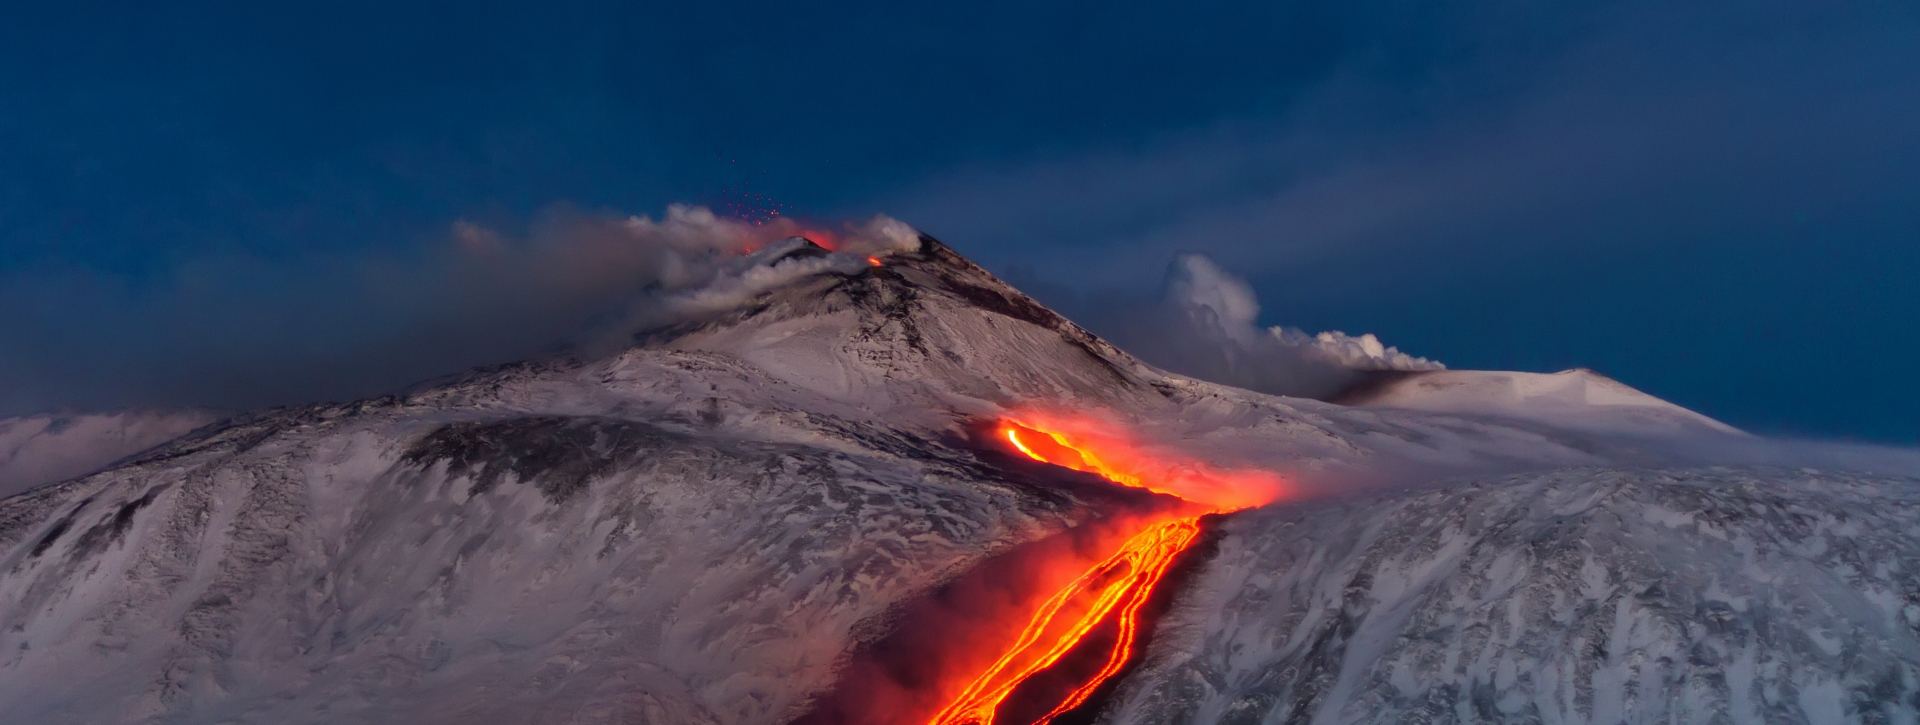 Etna eruption, see: activity, crater, lava